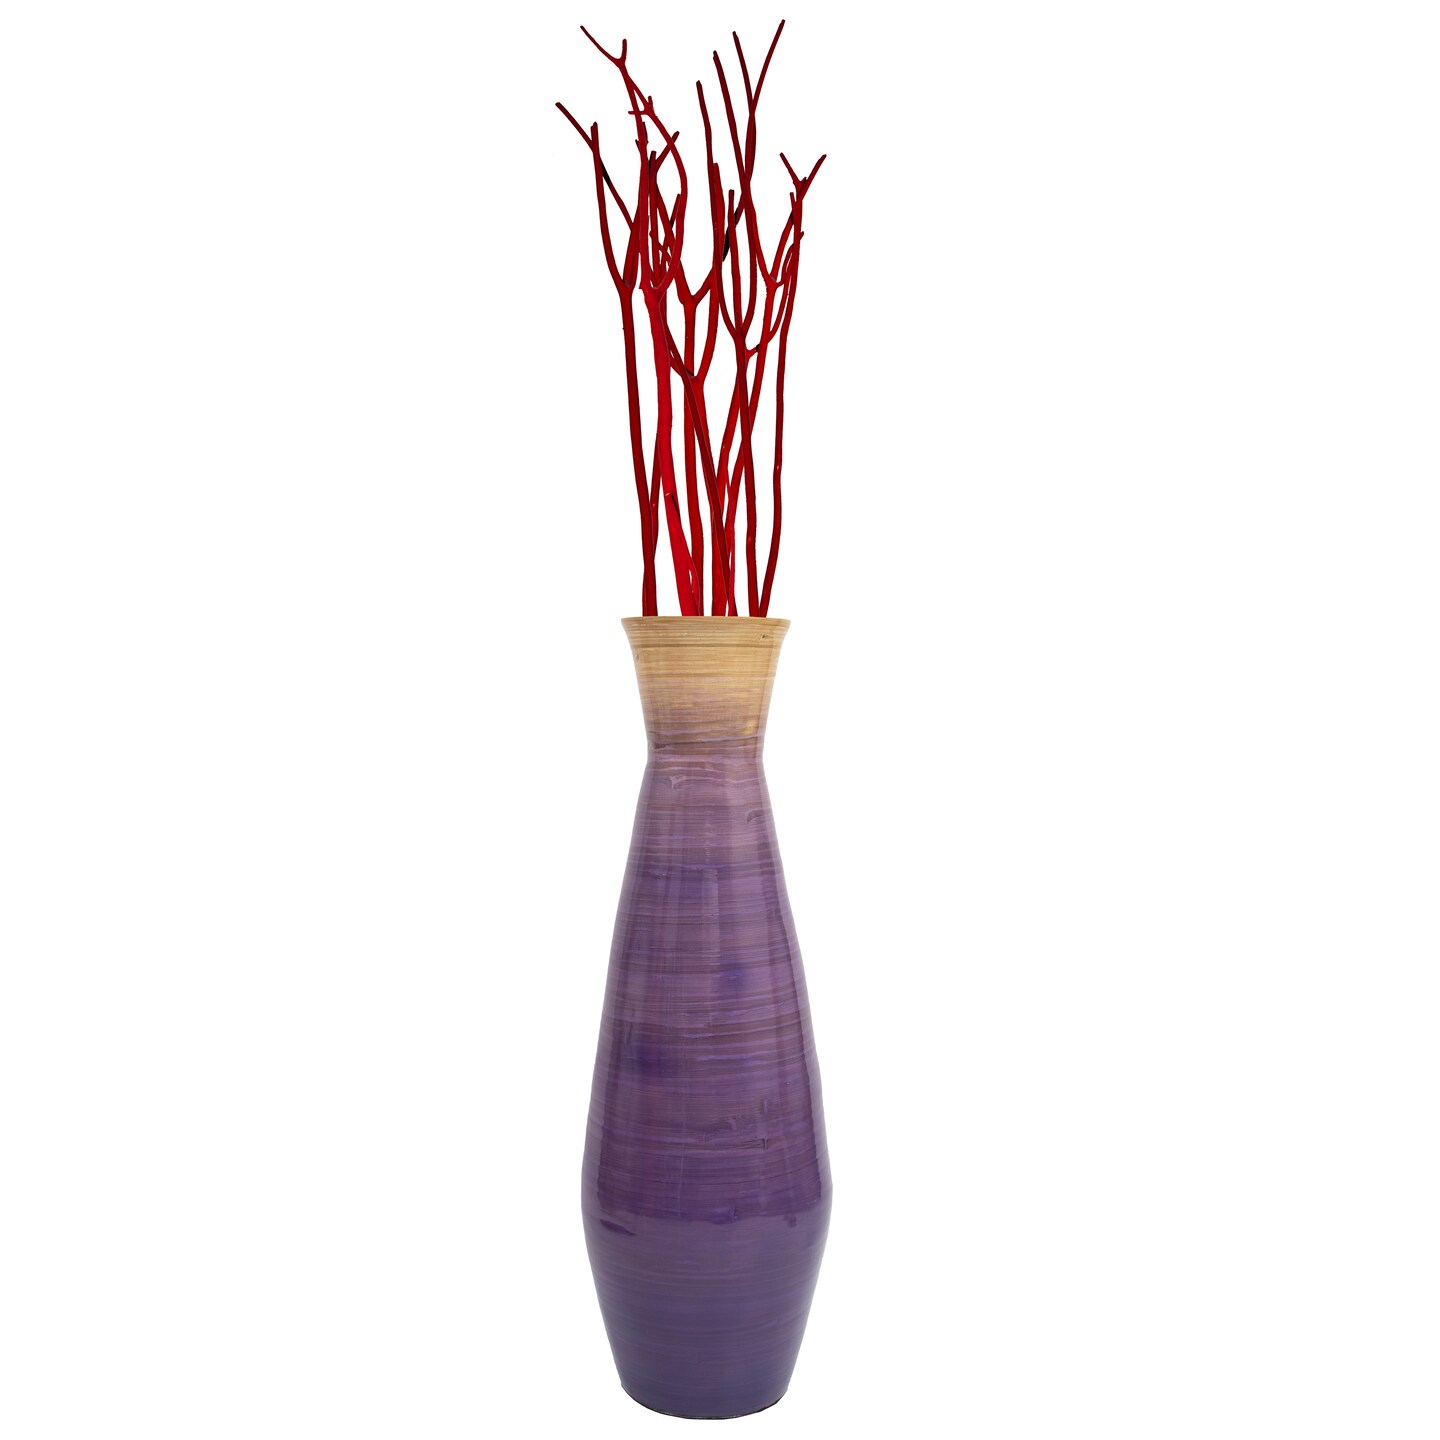 Uniquewise Classic Bamboo Floor Vase Handmade, For Dining, Living Room, Entryway, Fill Up With Dried Branches Or Flowers